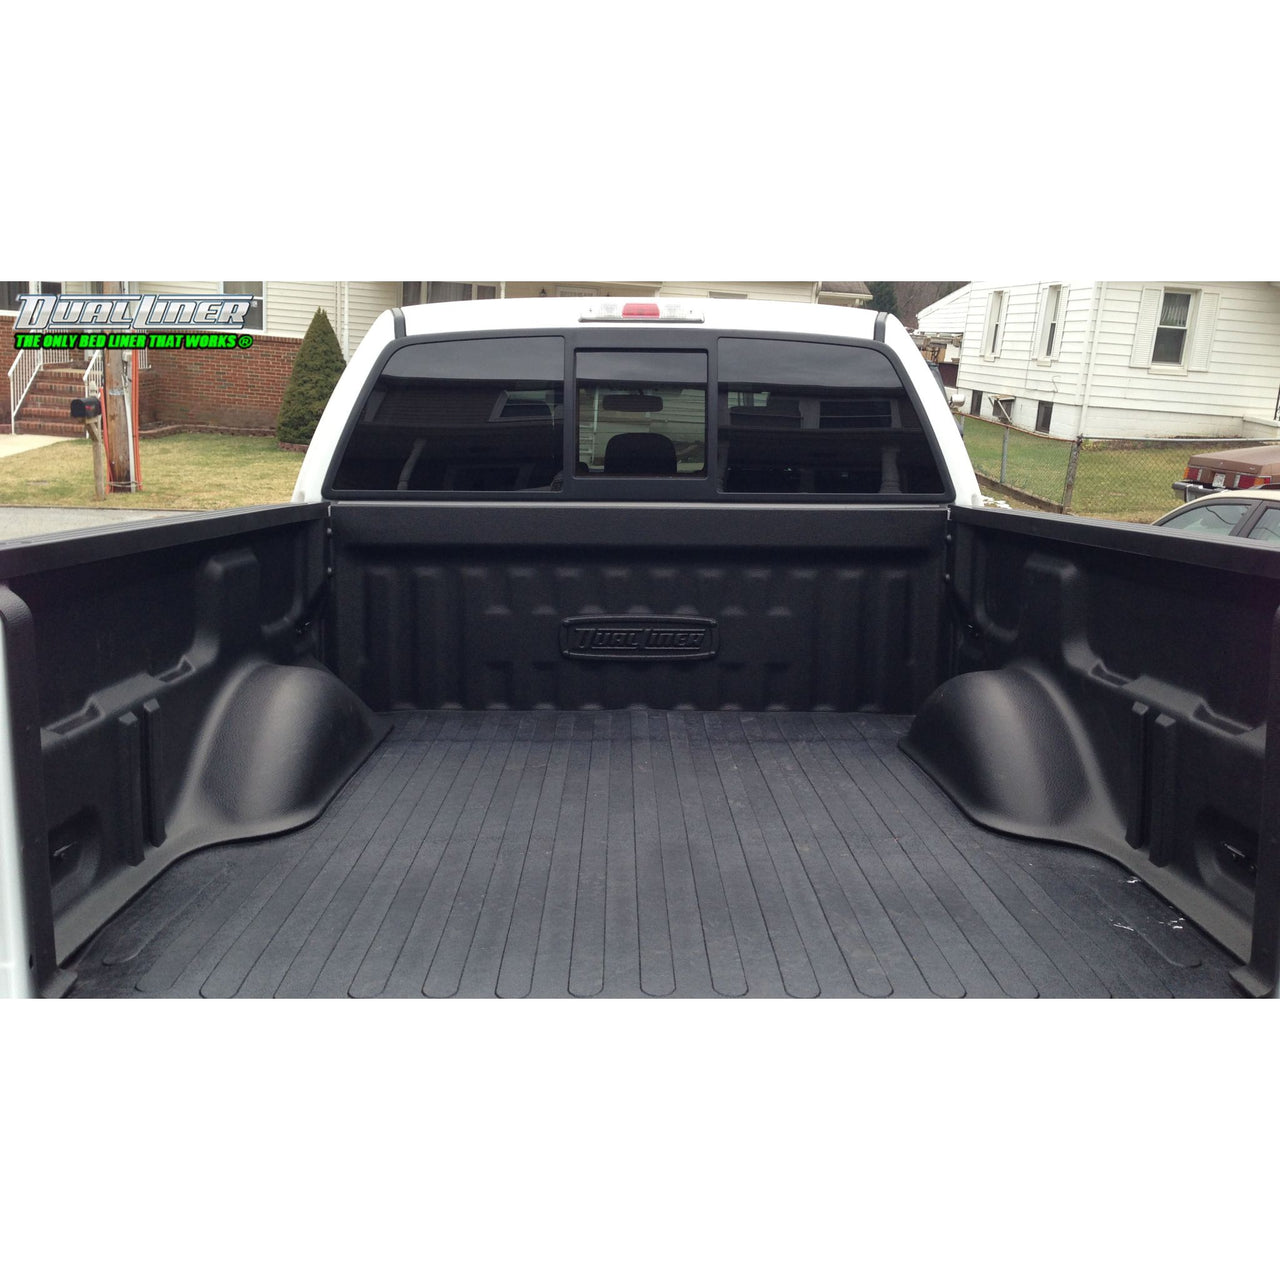 DualLiner 2017 to 2022 F-250 /F-350 (WITH LED Light Bar) - Long 8' Bed